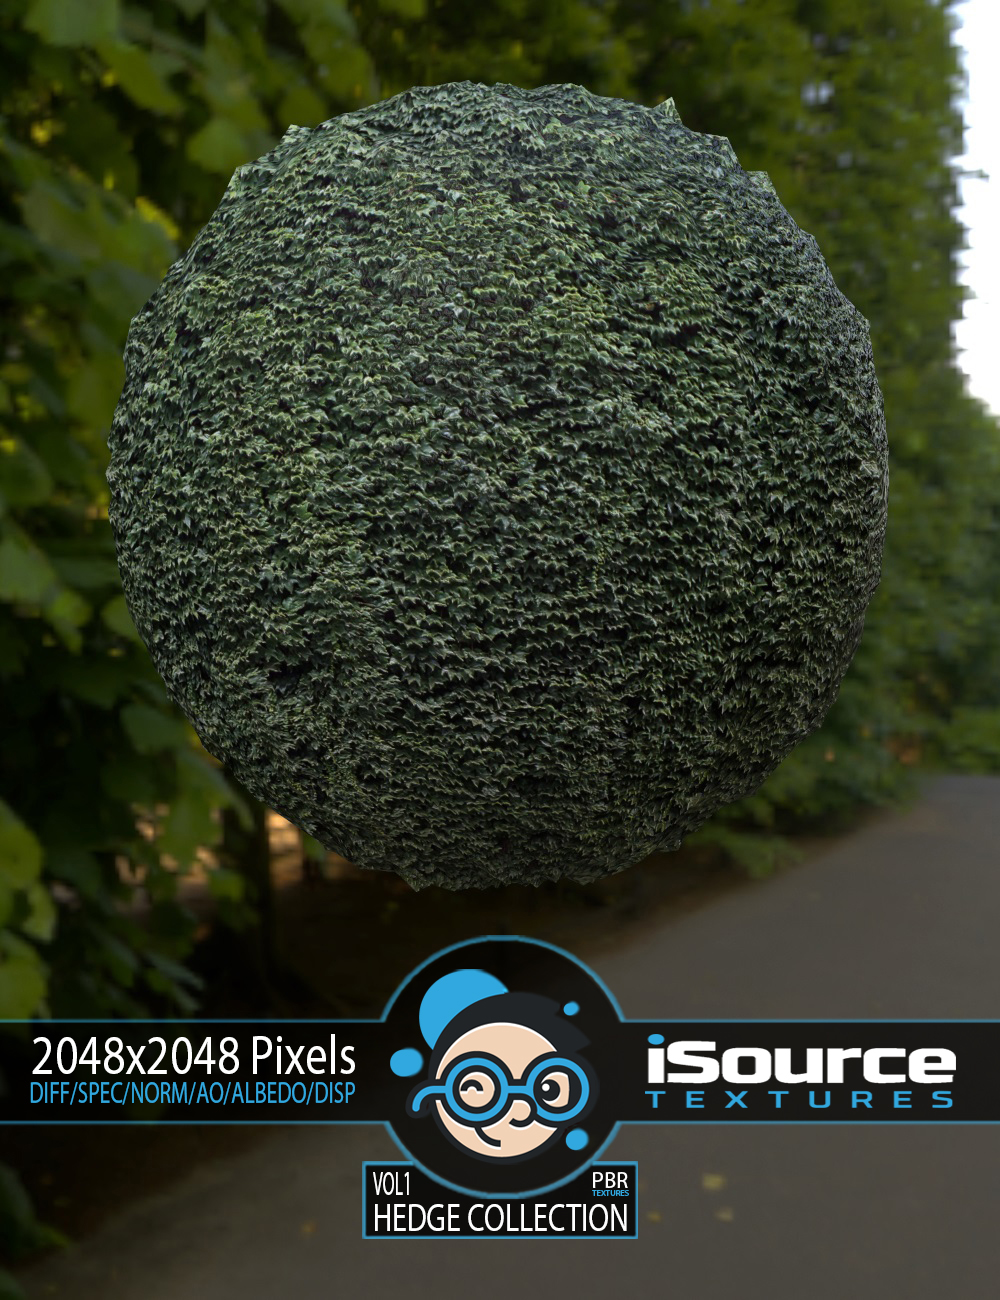 Hedge Collection Merchant Resource - Vol1 (PBR Textures) by: iSourceTextures, 3D Models by Daz 3D